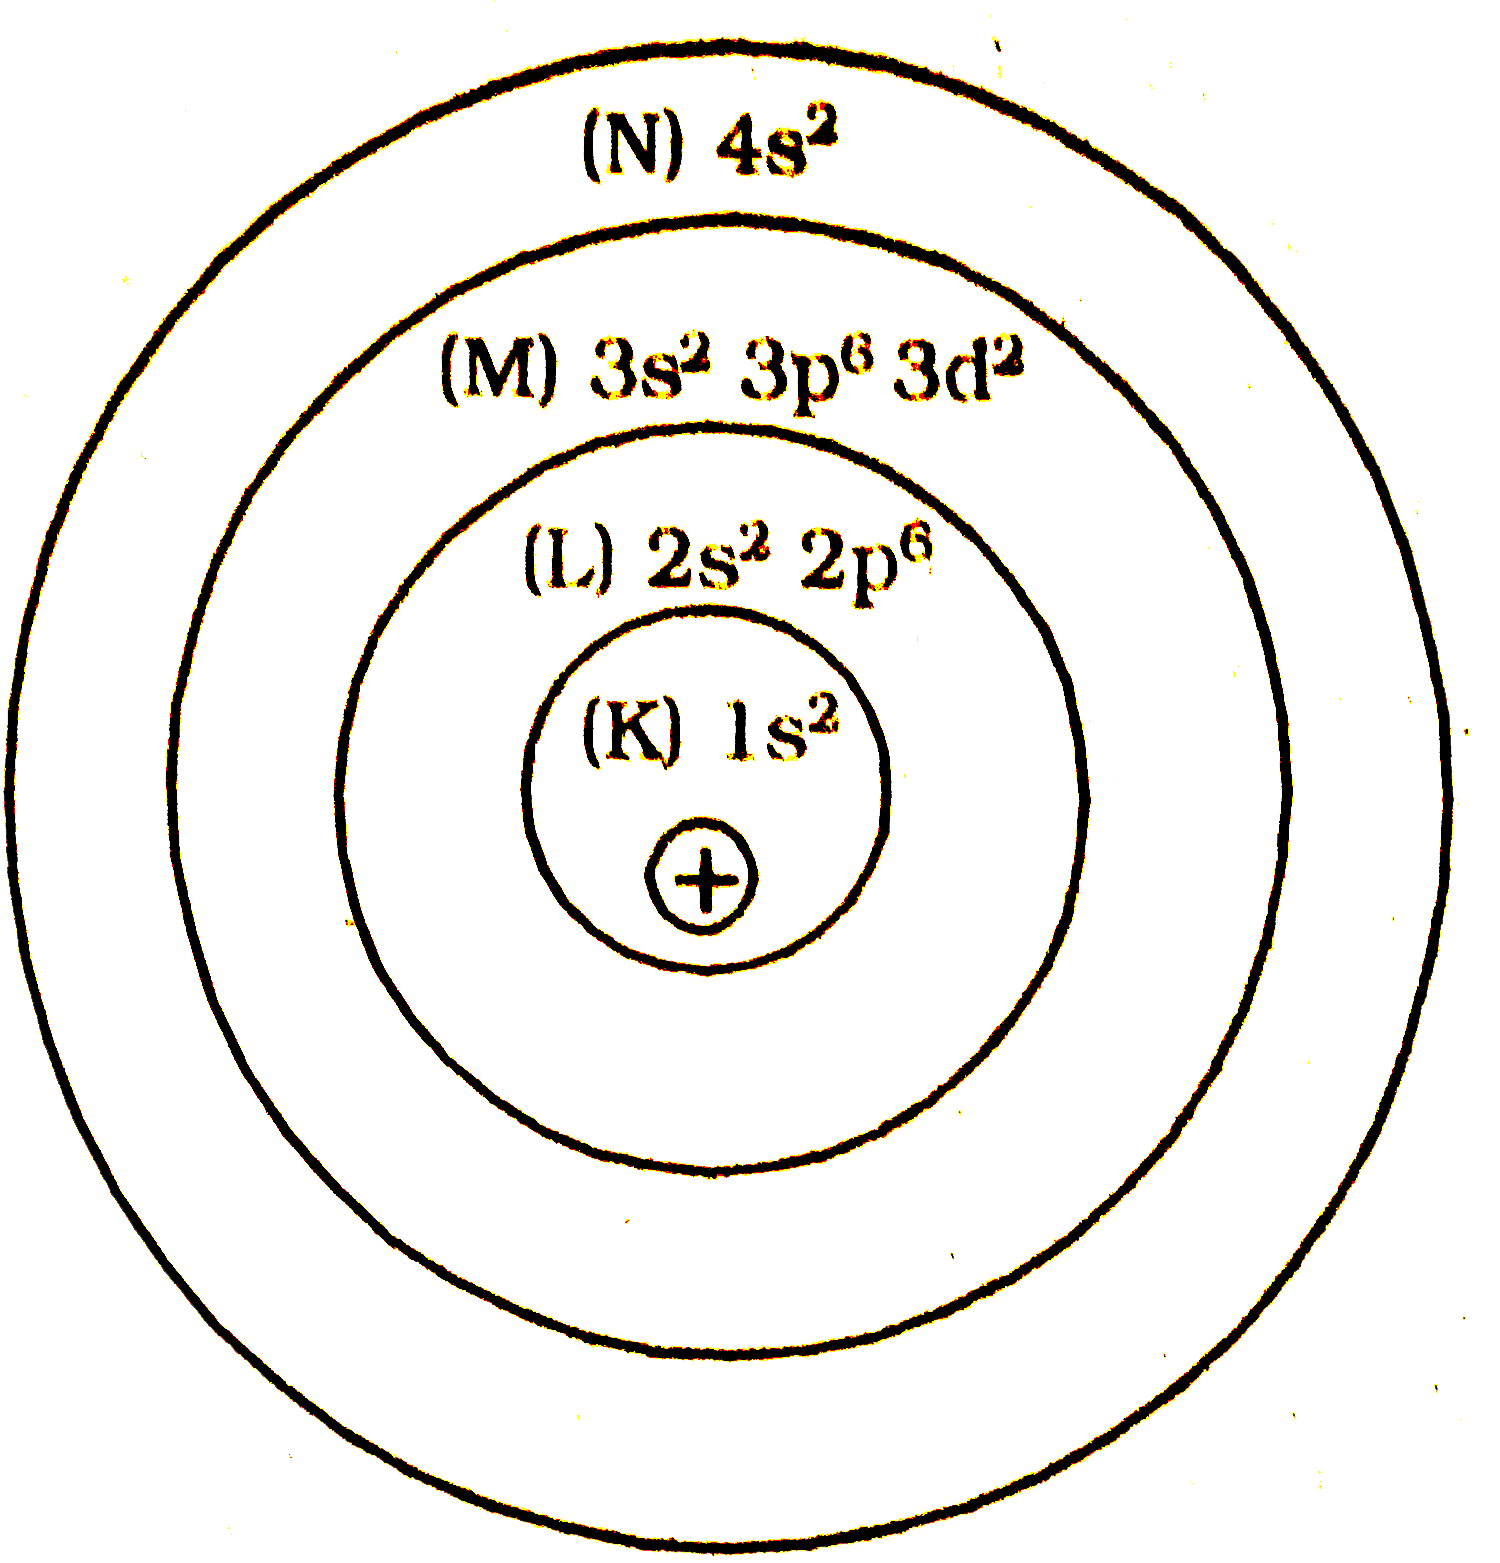 In an atom the number of electrons in M - shell is equal to the number of electrons in the K and L - shell . Answer the question.   Explanation :   1) Number of electrons in K-shell (1 s^(2)) = 2   Number of electrons in L-shell (2s^(2) sp^(6)) = 8   Total number of electrons in k & L shells = 10   2) Given that number of electrons in M-shell is equal to number of electrons in K& L- shells   3) Hence number of electrons in M-shell (3s^(2) 3p^(6) 3d^(2)) = 10   4) But , we know that before filling of 3d orbital 4s should be filled (4s^(2))   5) So , electronic configuration is 1s^(2) 2s^(2) 2p^(6) 3s^(2) 3p^(6) 4s^(2) 3d^(2)       What is the atomic number of element ?